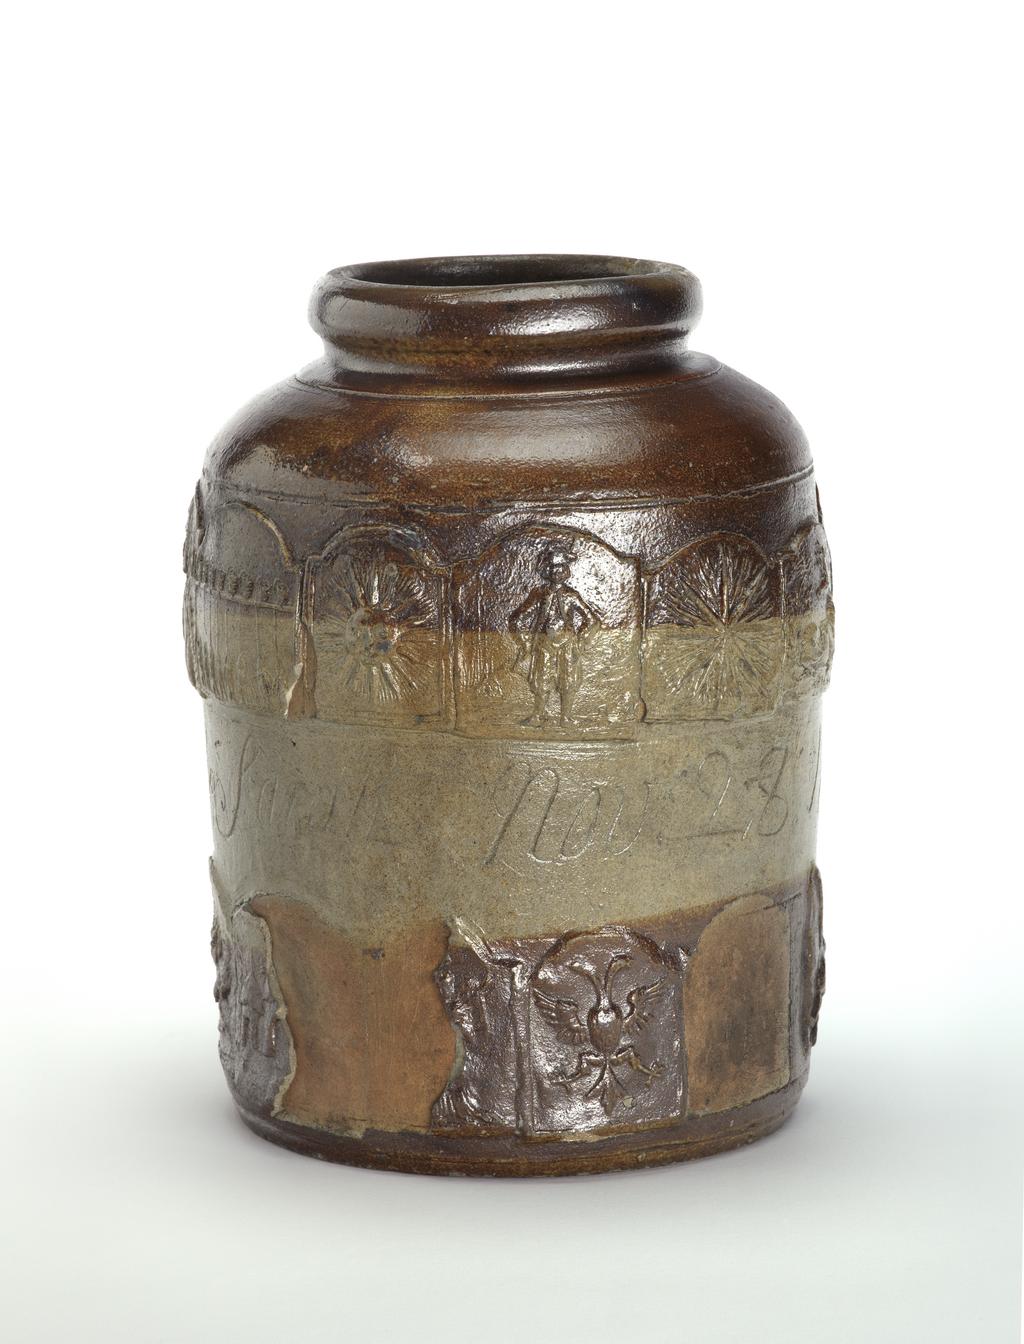 An image of Pickle jar. Unidentified pottery, possibly London. The jar is cylindrical with curved shoulders, a short incurved neck and rolled mouth. Round the middle are incised the names and date 'George Bennison & Sarah Nov 28 1752', Above and below this, there is a band of adjacent inn-signs. Above: The Four Swans, The Grenadier, The Crown, The King's Head (with initials GR), the Duke of Marlborough (DM), The Peal of Bells (eight bells and bell ringers), The Sun, The Jolly Sailor, The Star, The Hart, and The Noah's Ark. Below: The Bull, The Griffin, The Bell, The Swan, The Rose (with the name Wm Hasmere?), The Castle (? part missing), The Angel, The Spread Eagle, another missing, and The Angler (?). Greyish buff stoneware, thrown, decorated with applied moulded reliefs, coated with dark brown dip on the upper and lower part of the sides, and salt-glazed, height, whole, 27.3 cm, dated 1752.